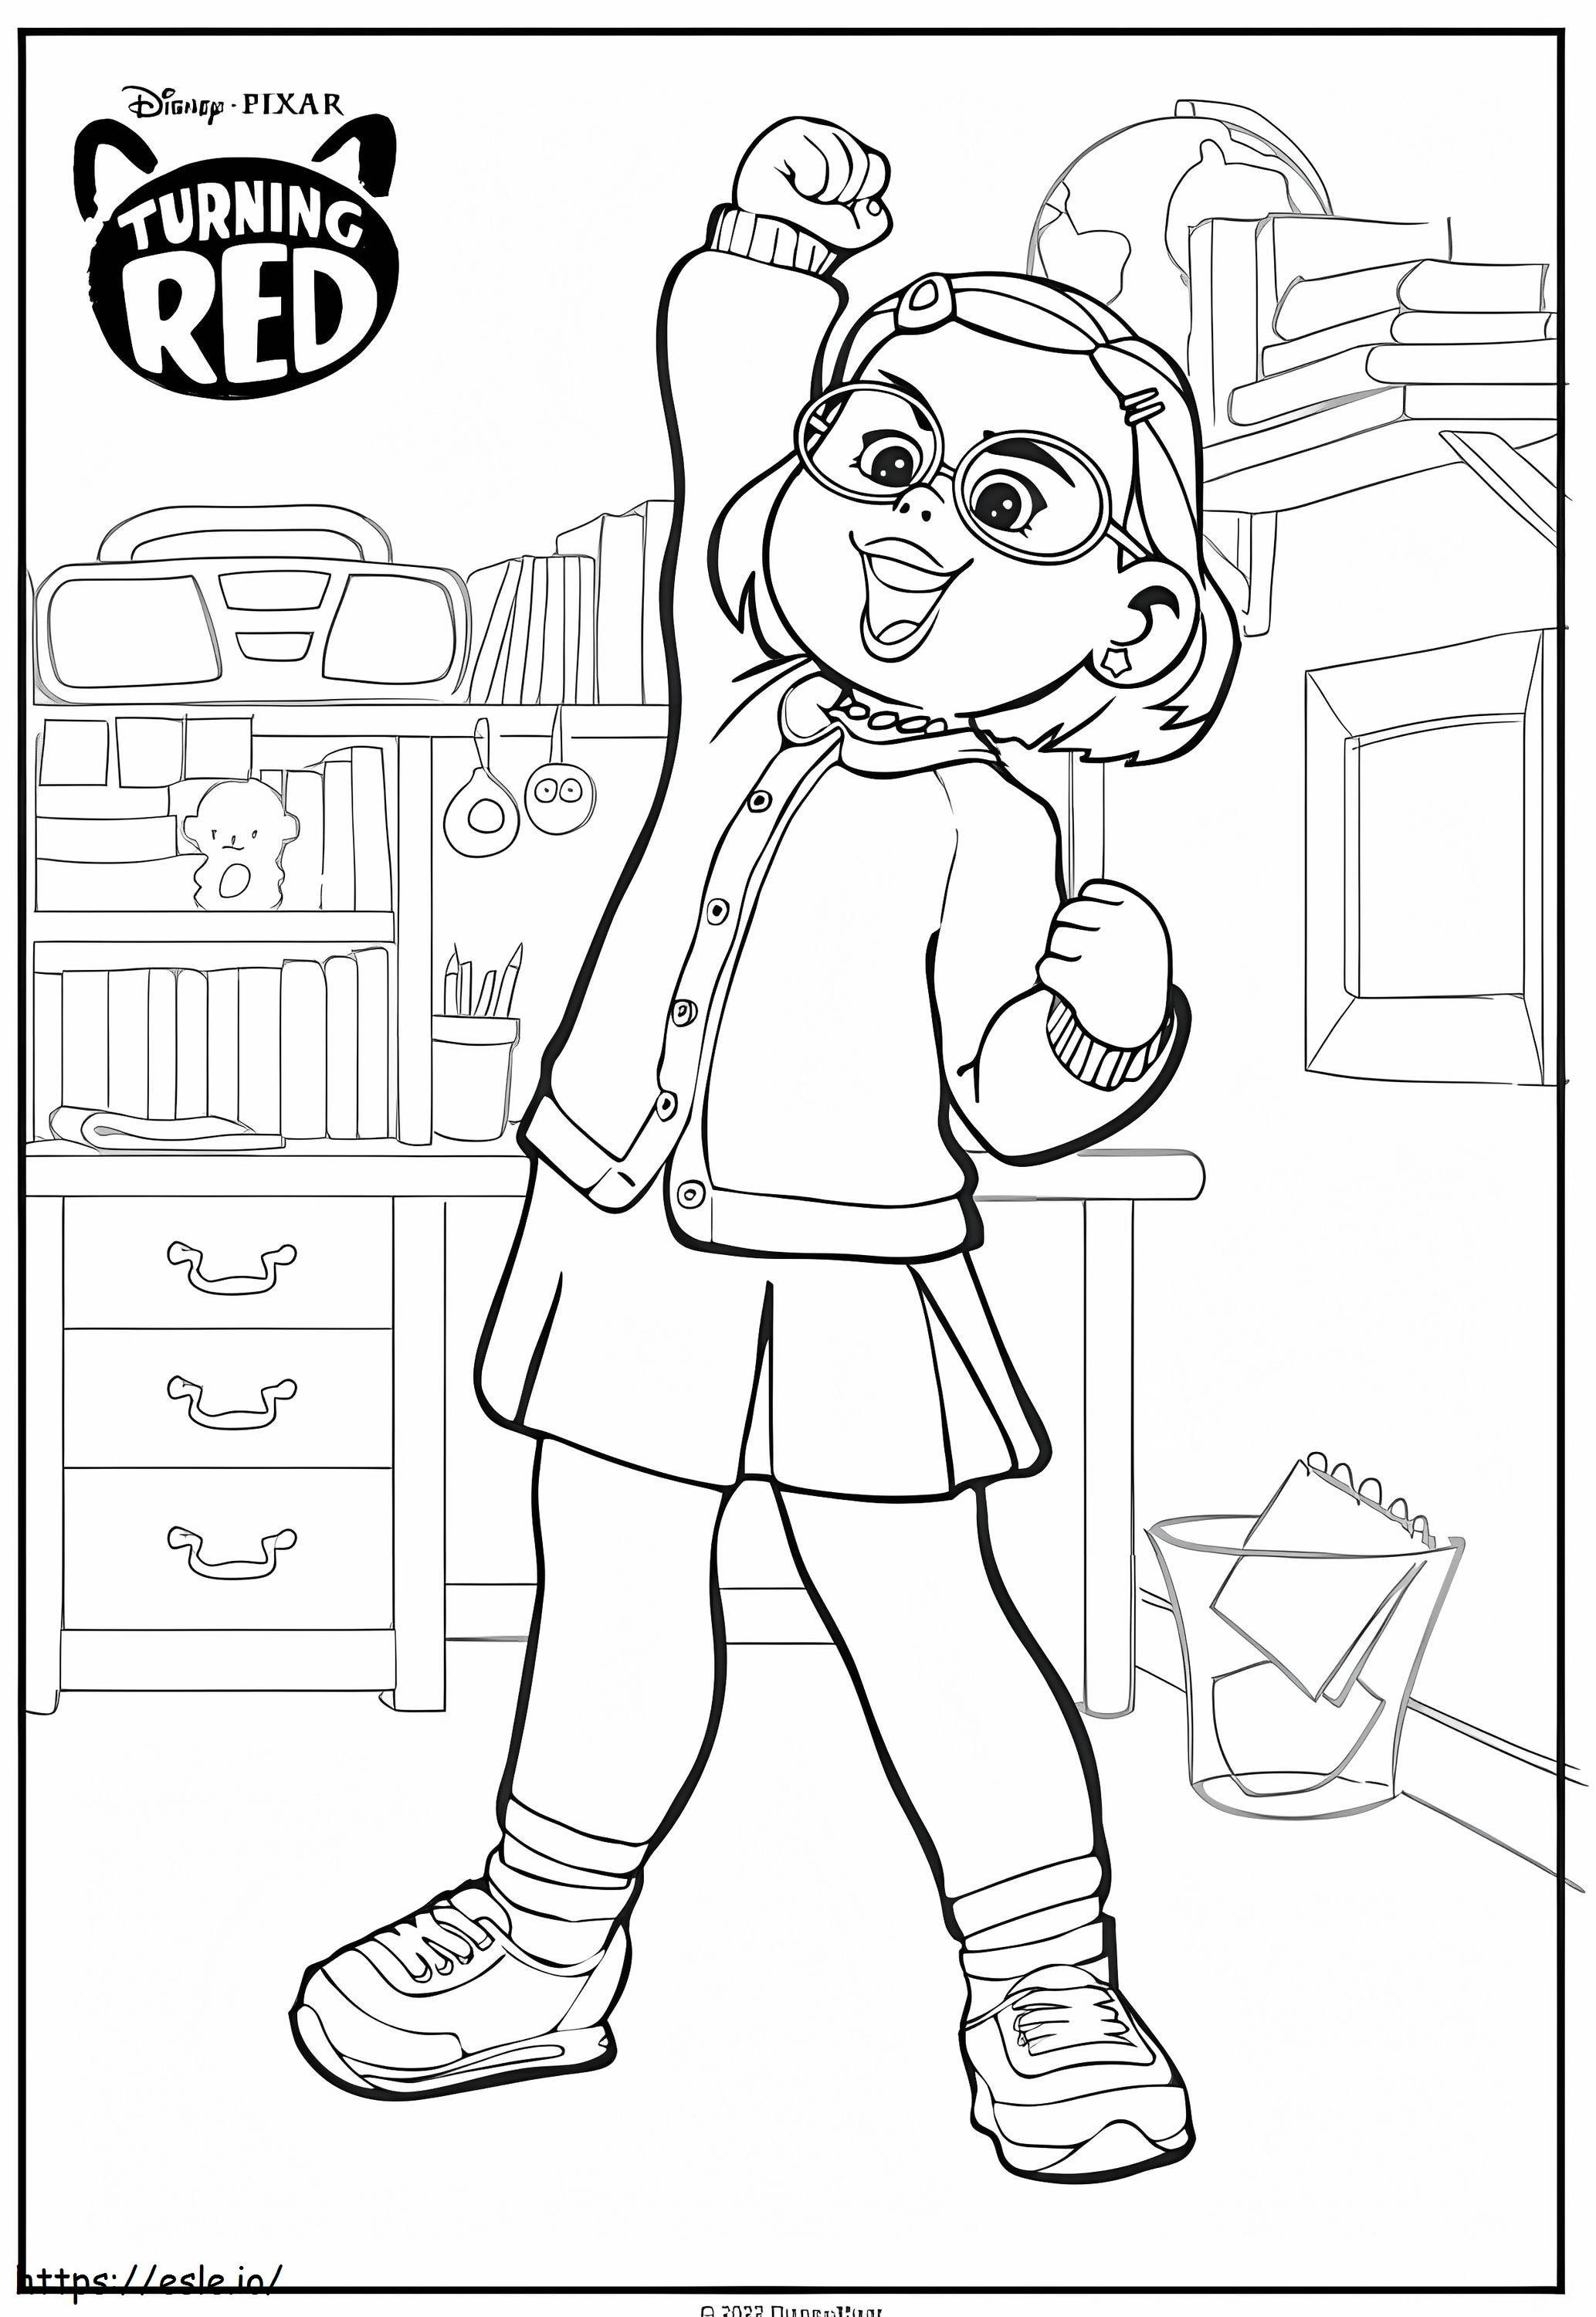 Mei Lee Turning Red coloring page